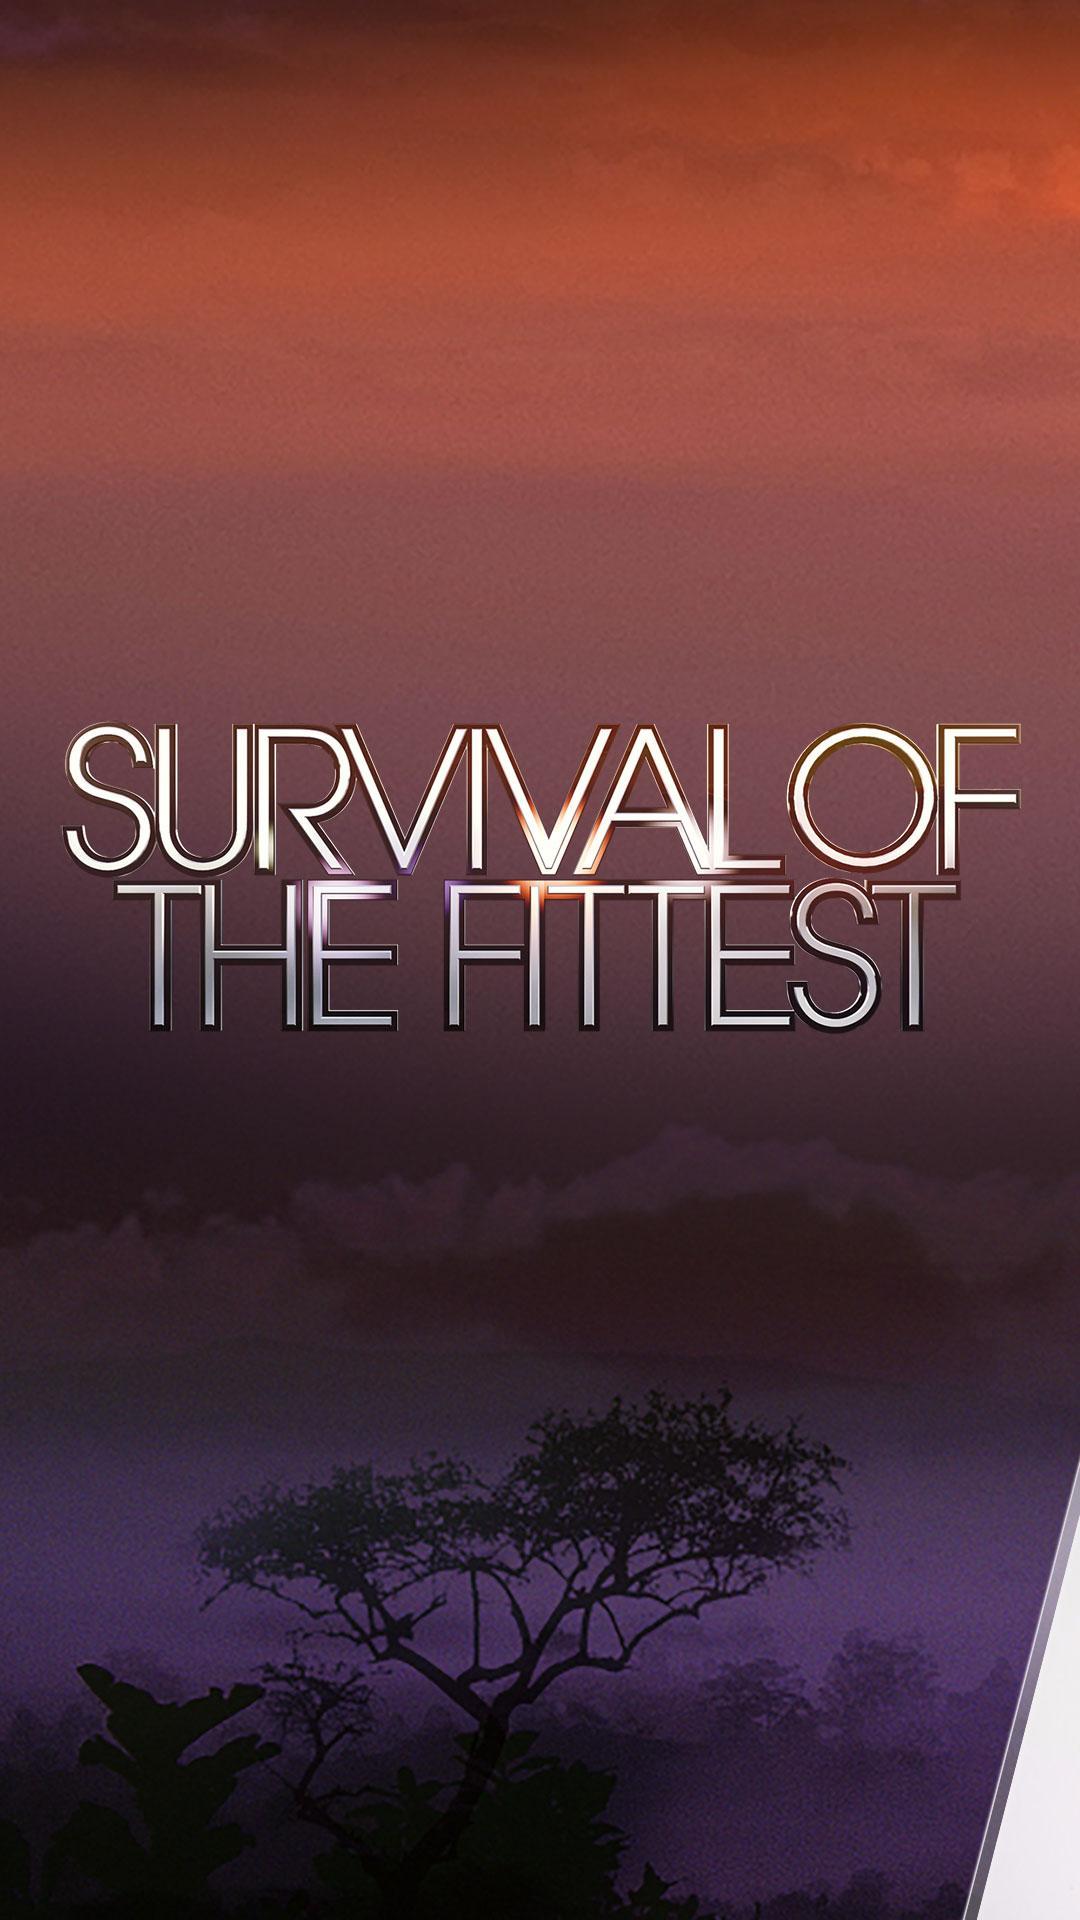 Wallpaper Survival Of The Fittest For Android Apk Download For iPhone Free